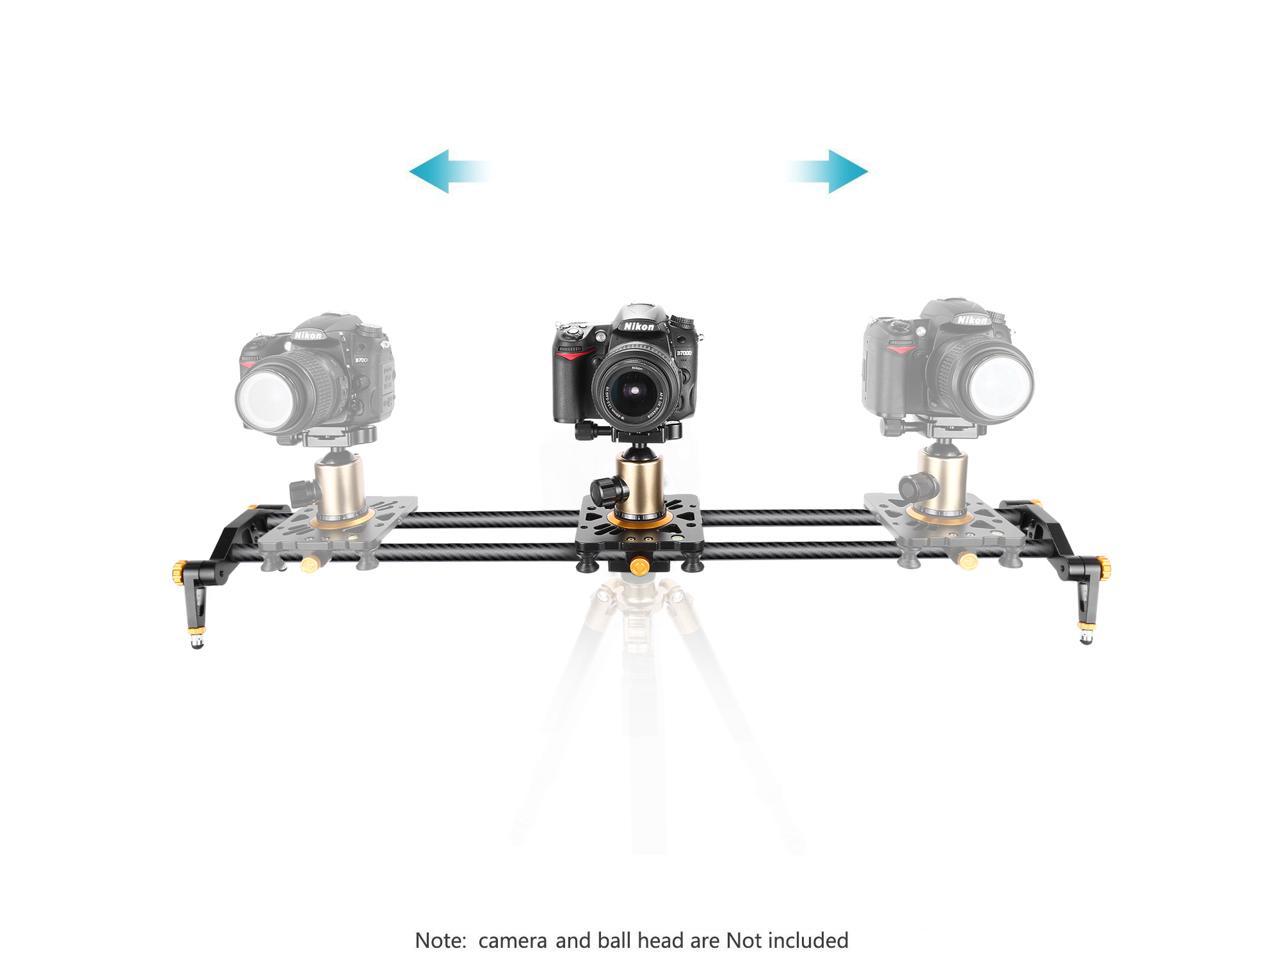 Load up to 17.5 pounds/8 kilograms Neewer 31.5 inches/80 centimeters Carbon Fiber Camera Track Slider Video Stabilizer Rail with 6 Bearings for DSLR Camera DV Video Camcorder Film Photography 